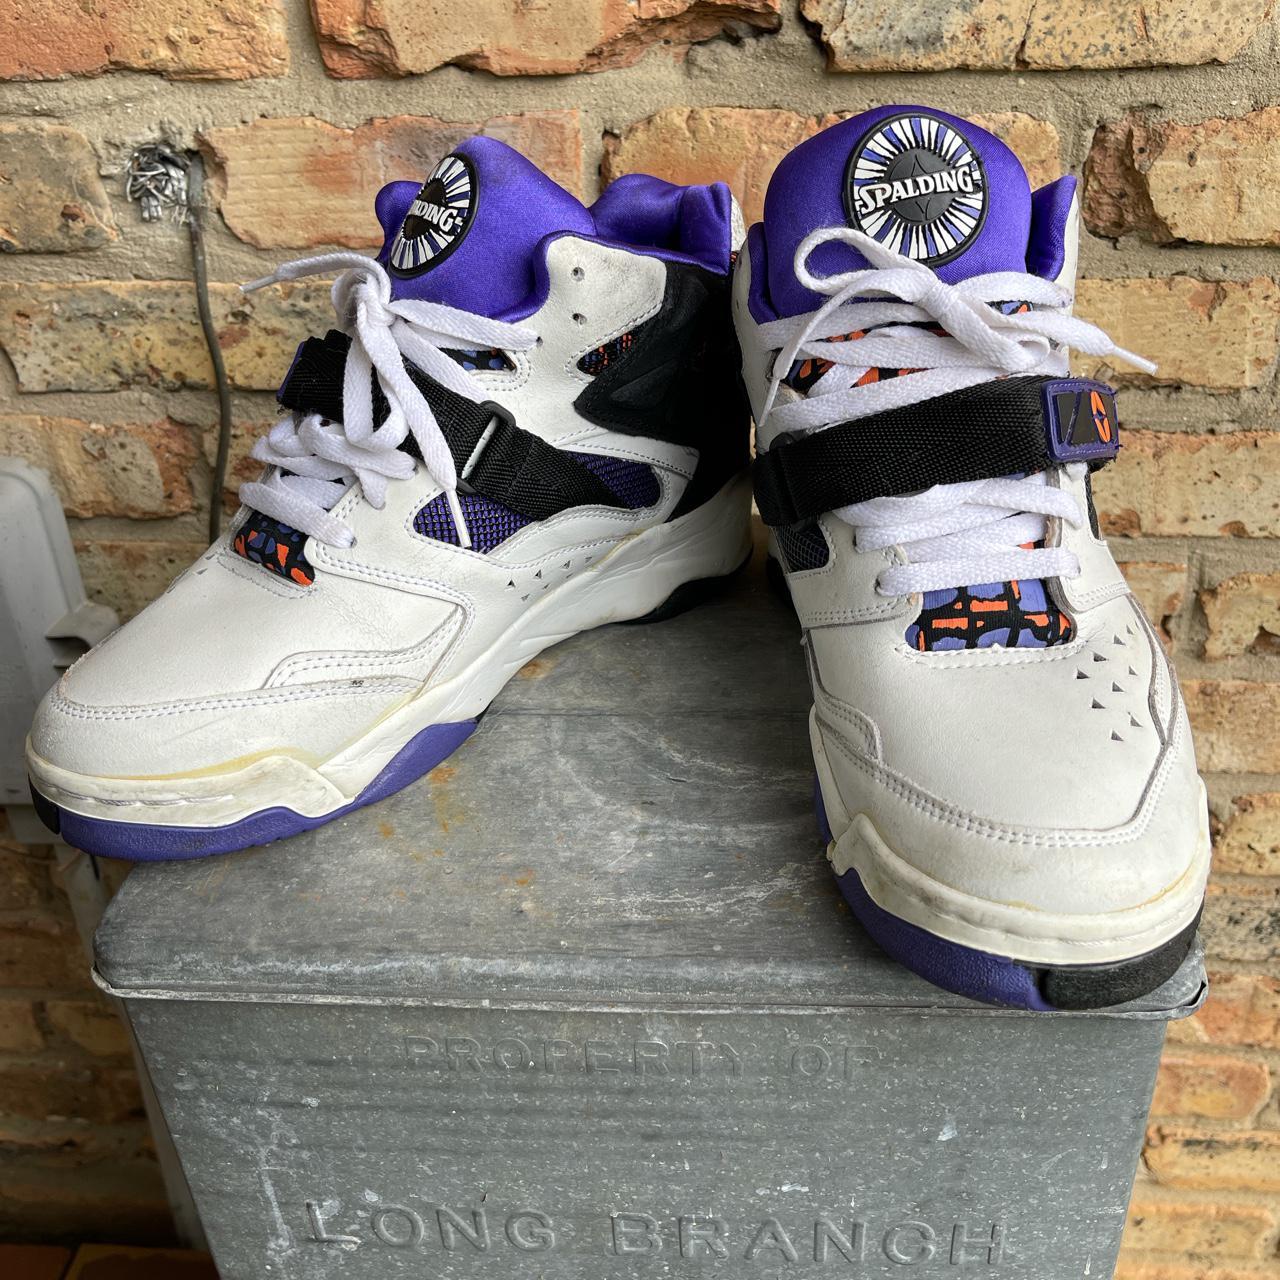 Spalding Men's Purple and White Trainers | Depop